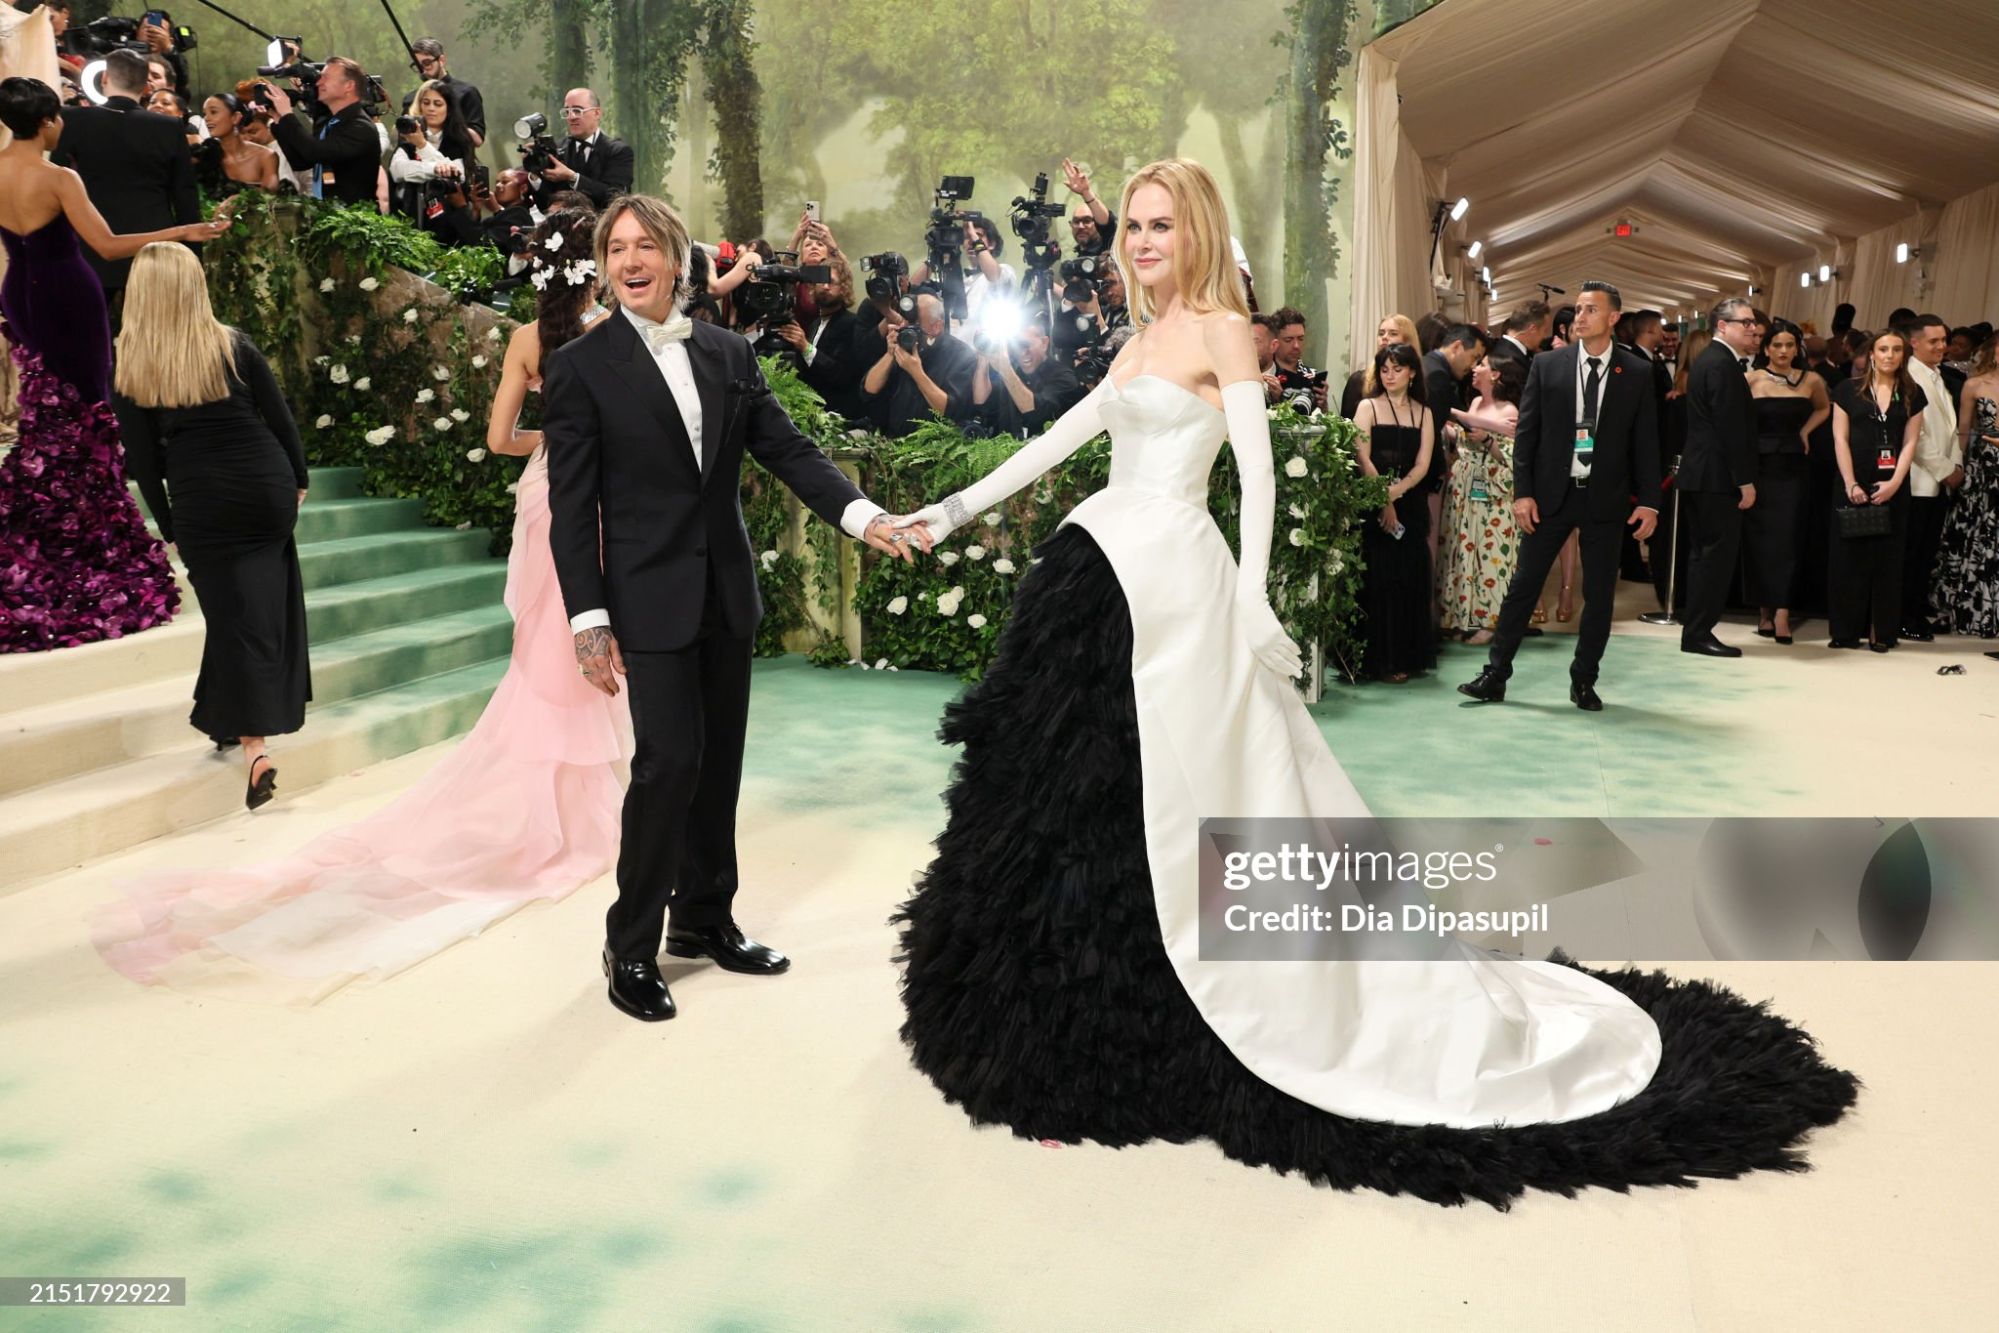 gettyimages-2151792922-2048x2048.jpg